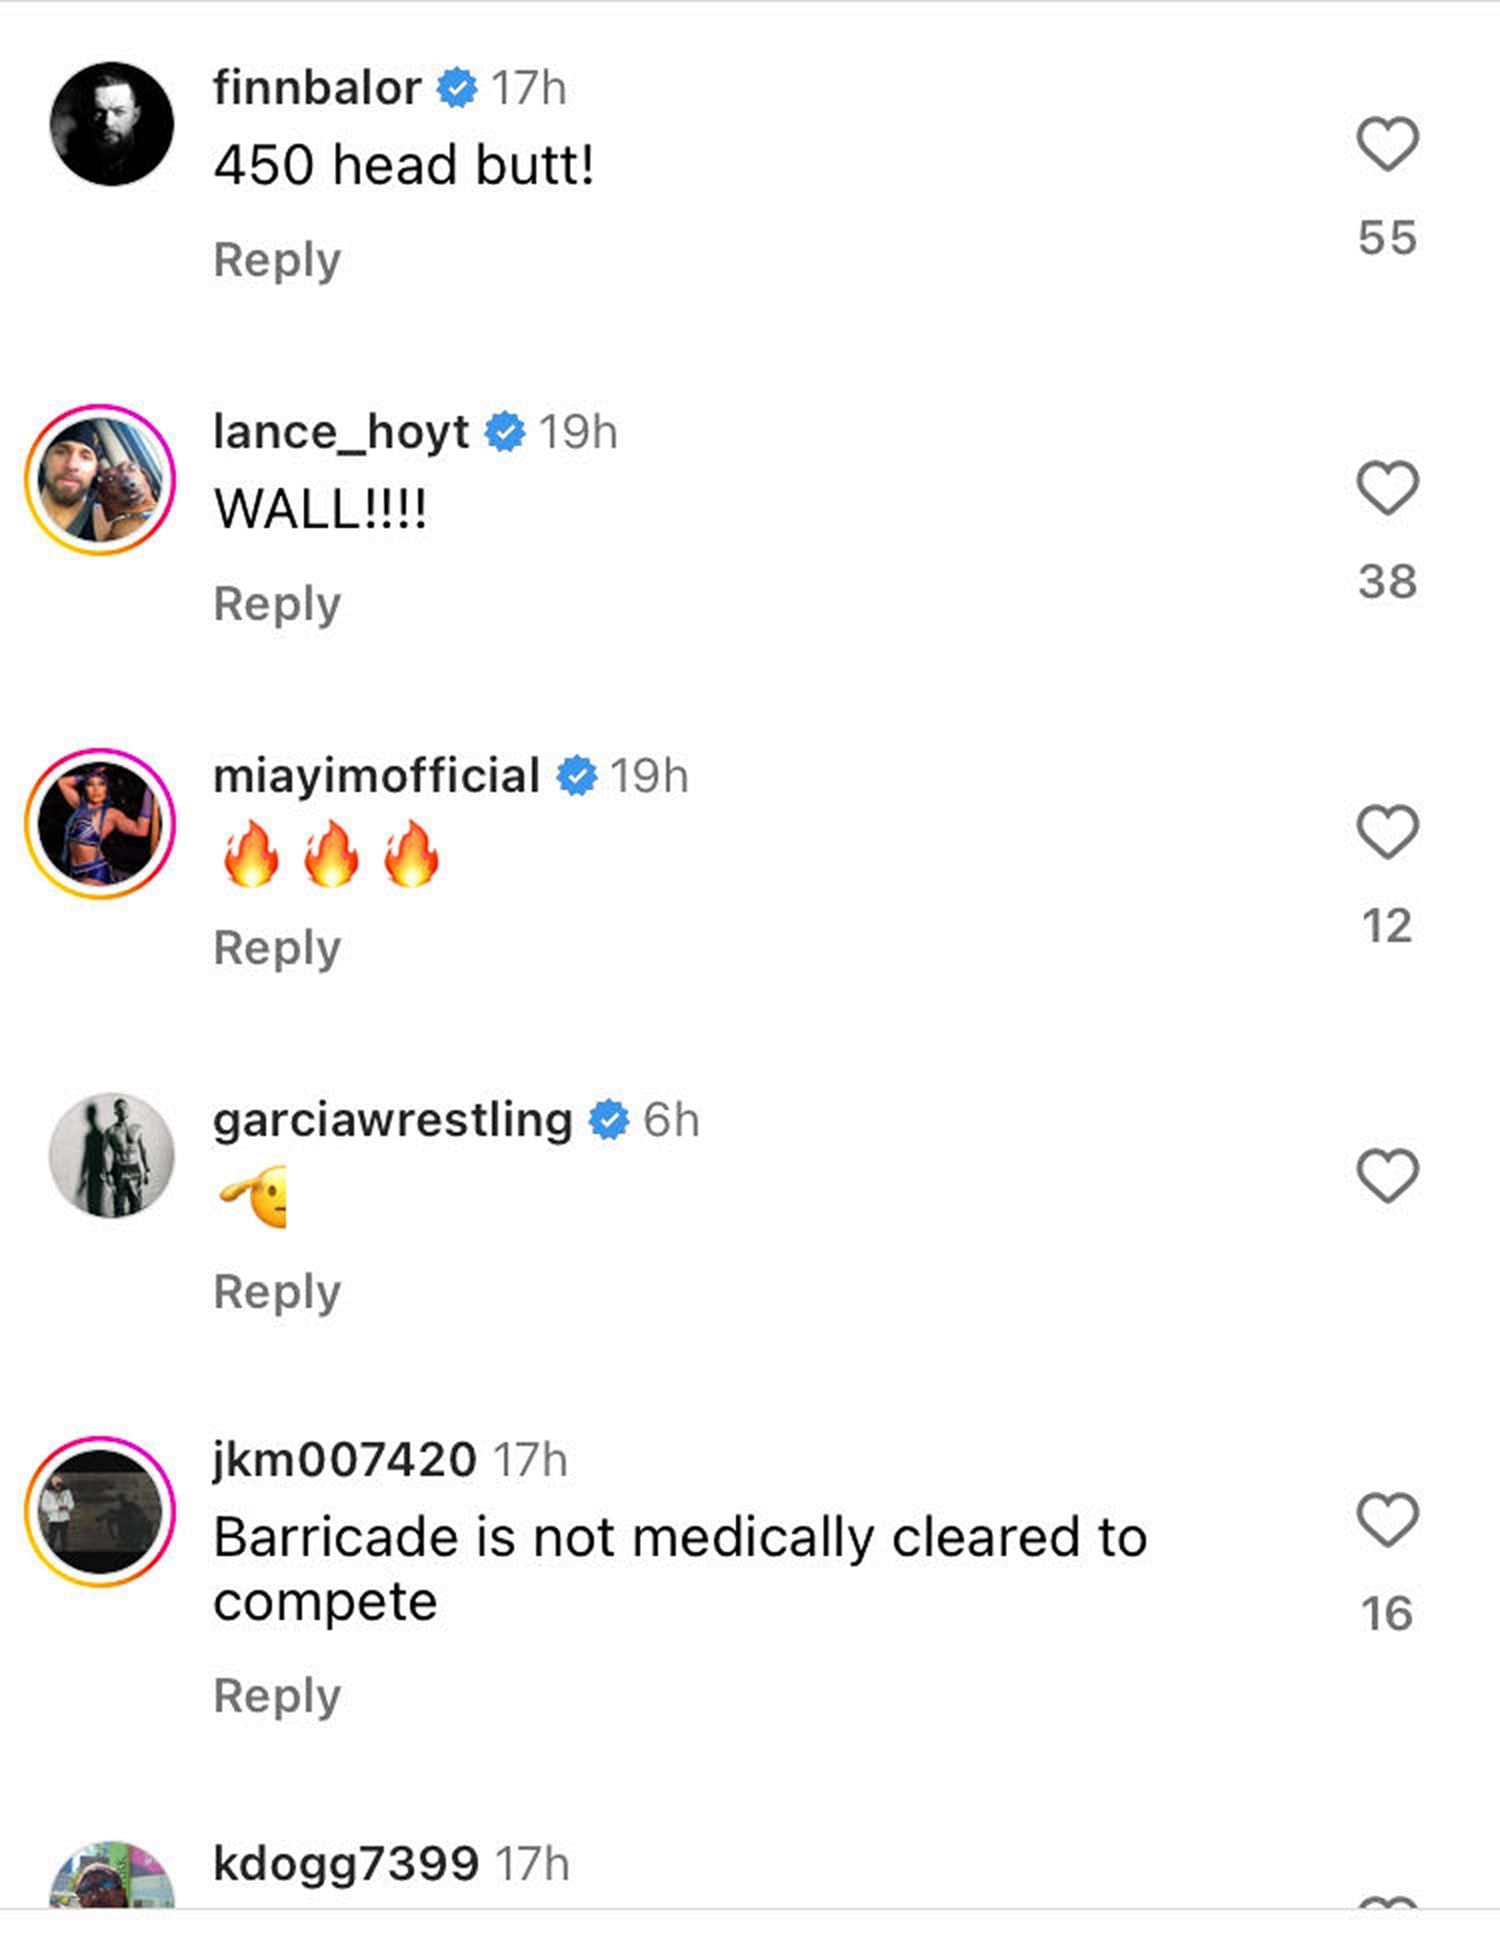 Several stars have commented on the botch.